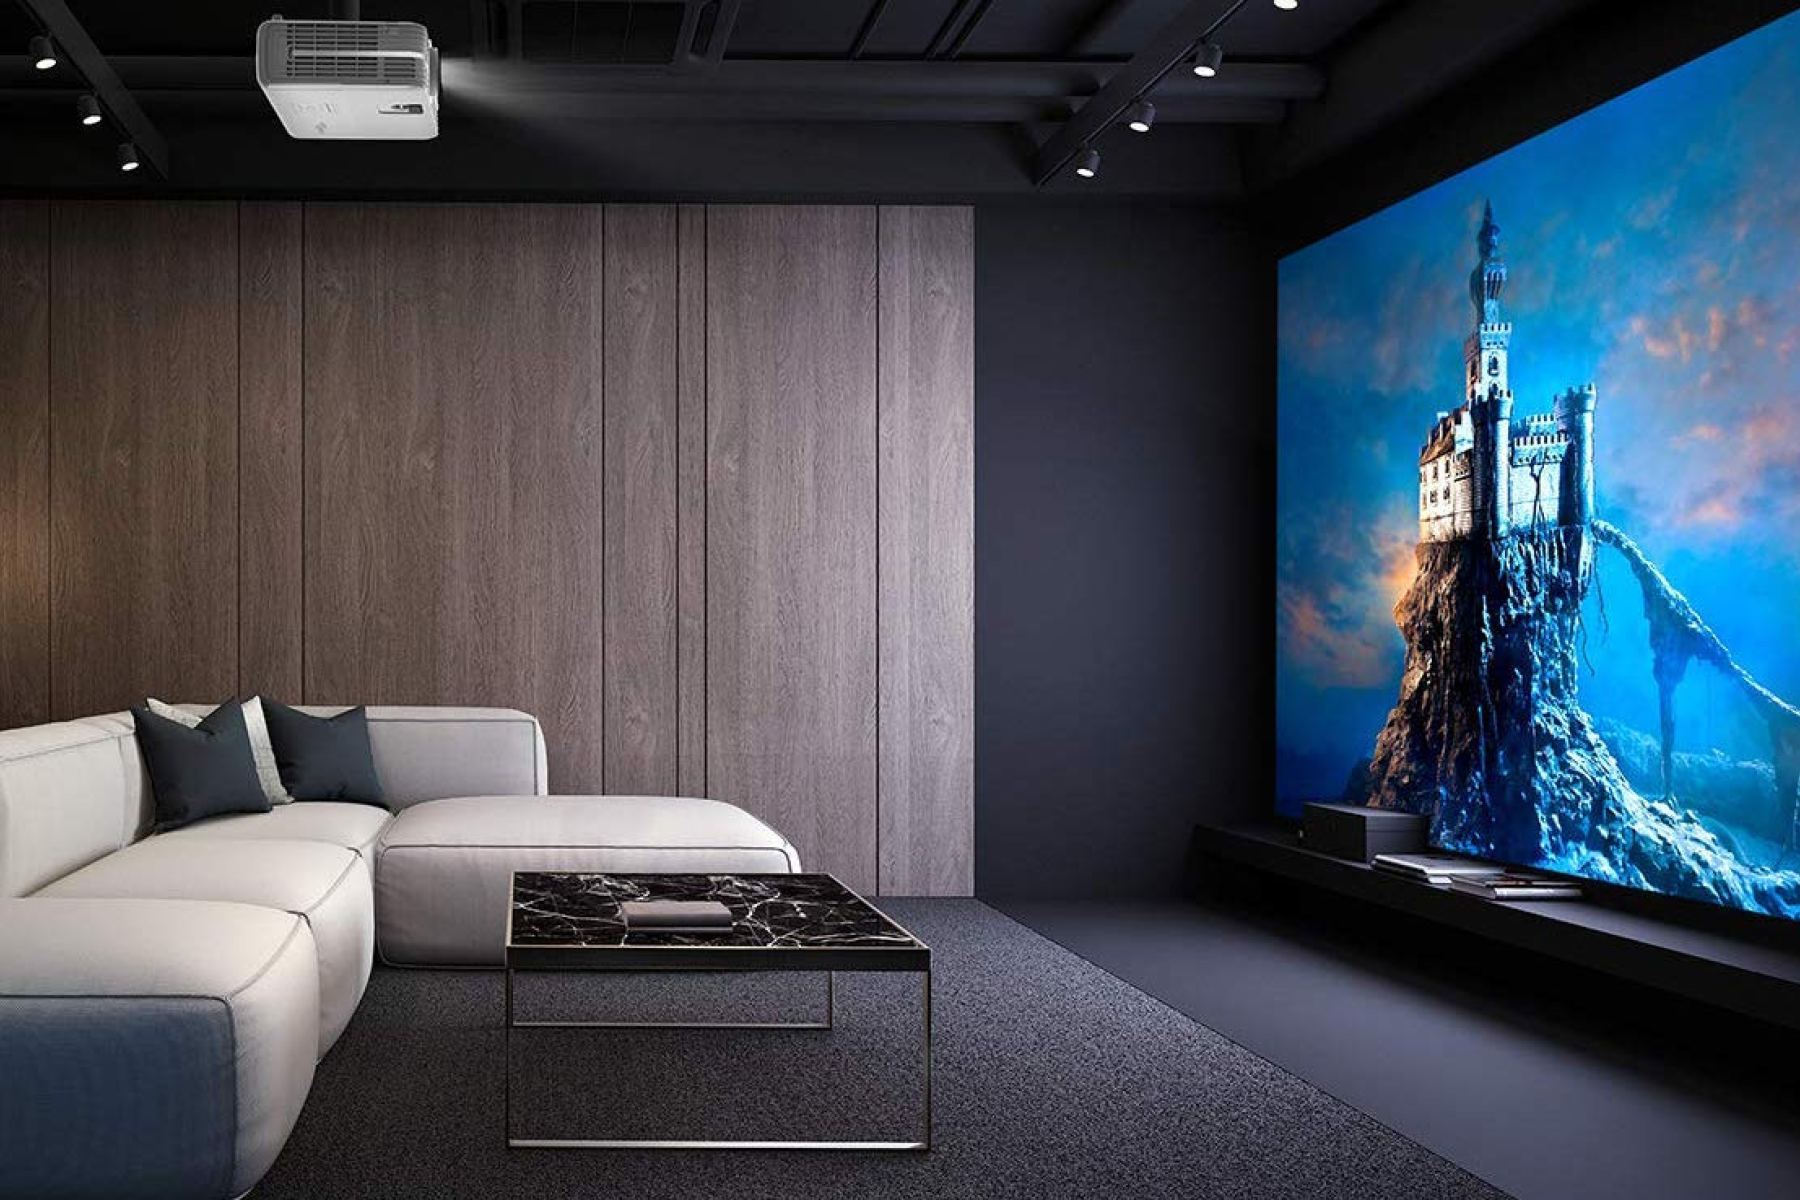 best projector for small room